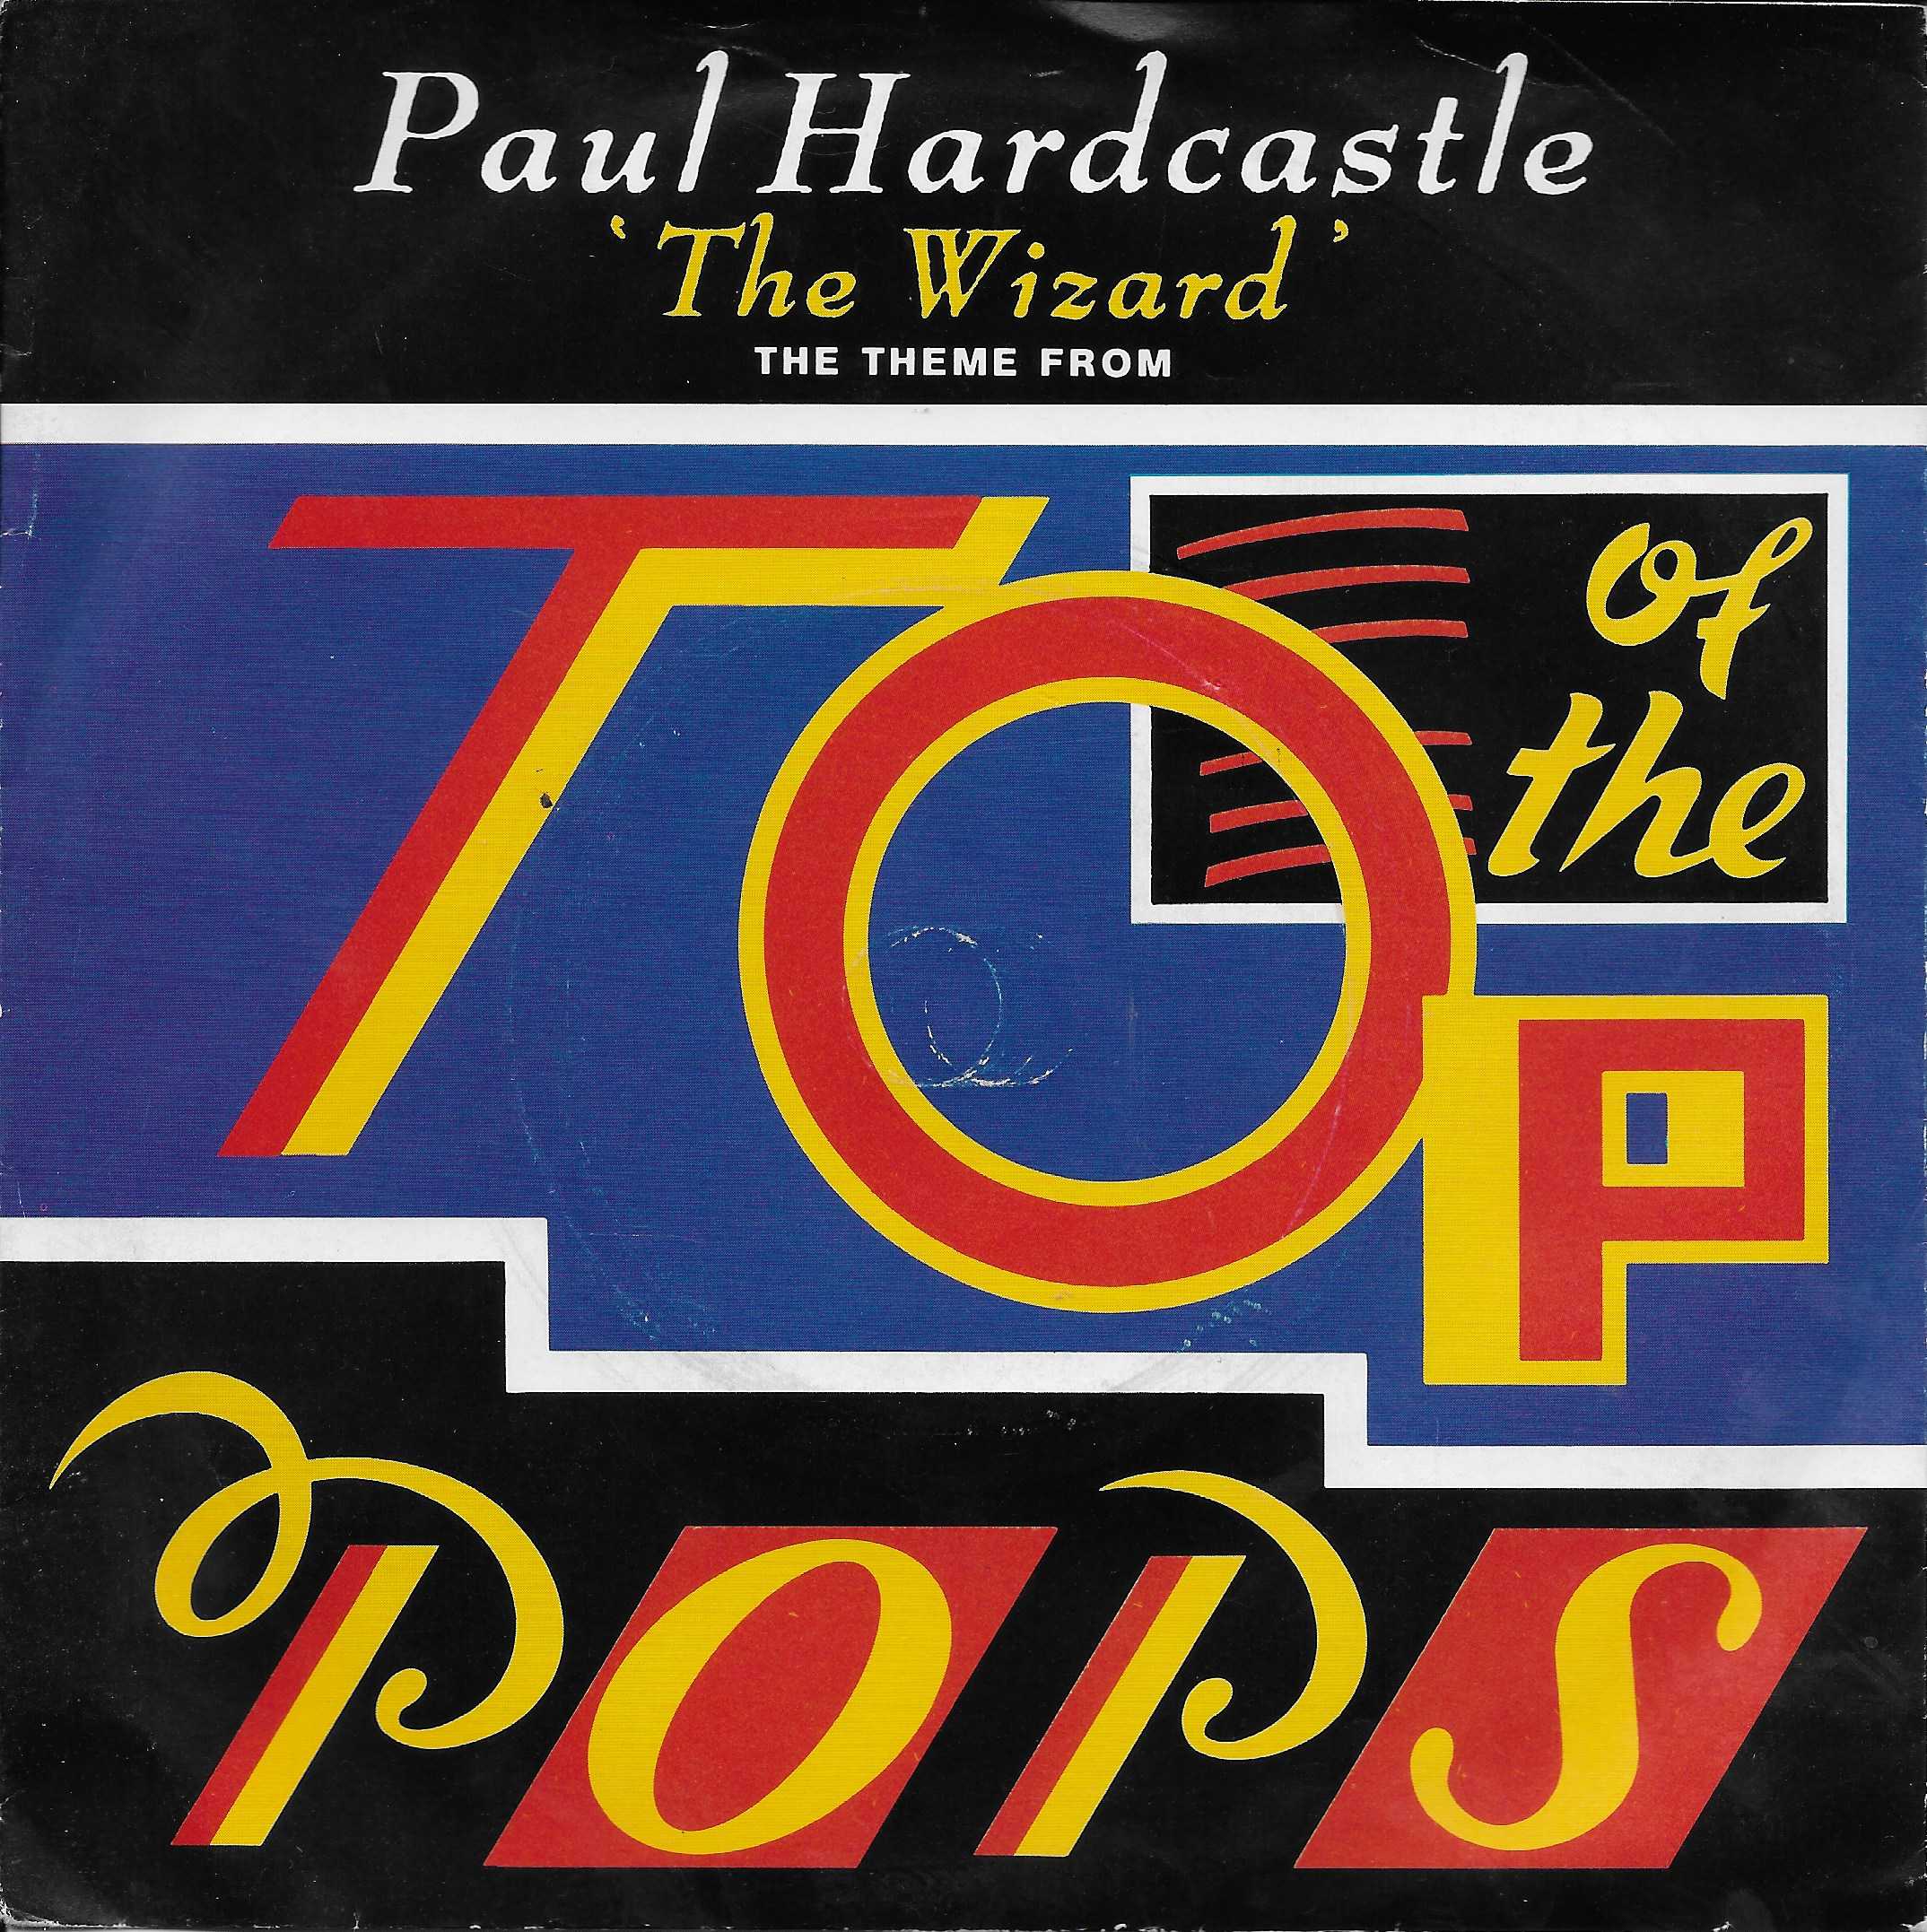 Picture of The wizard part 1 (Top of the pops) by artist Paul Hardcastle from the BBC singles - Records and Tapes library